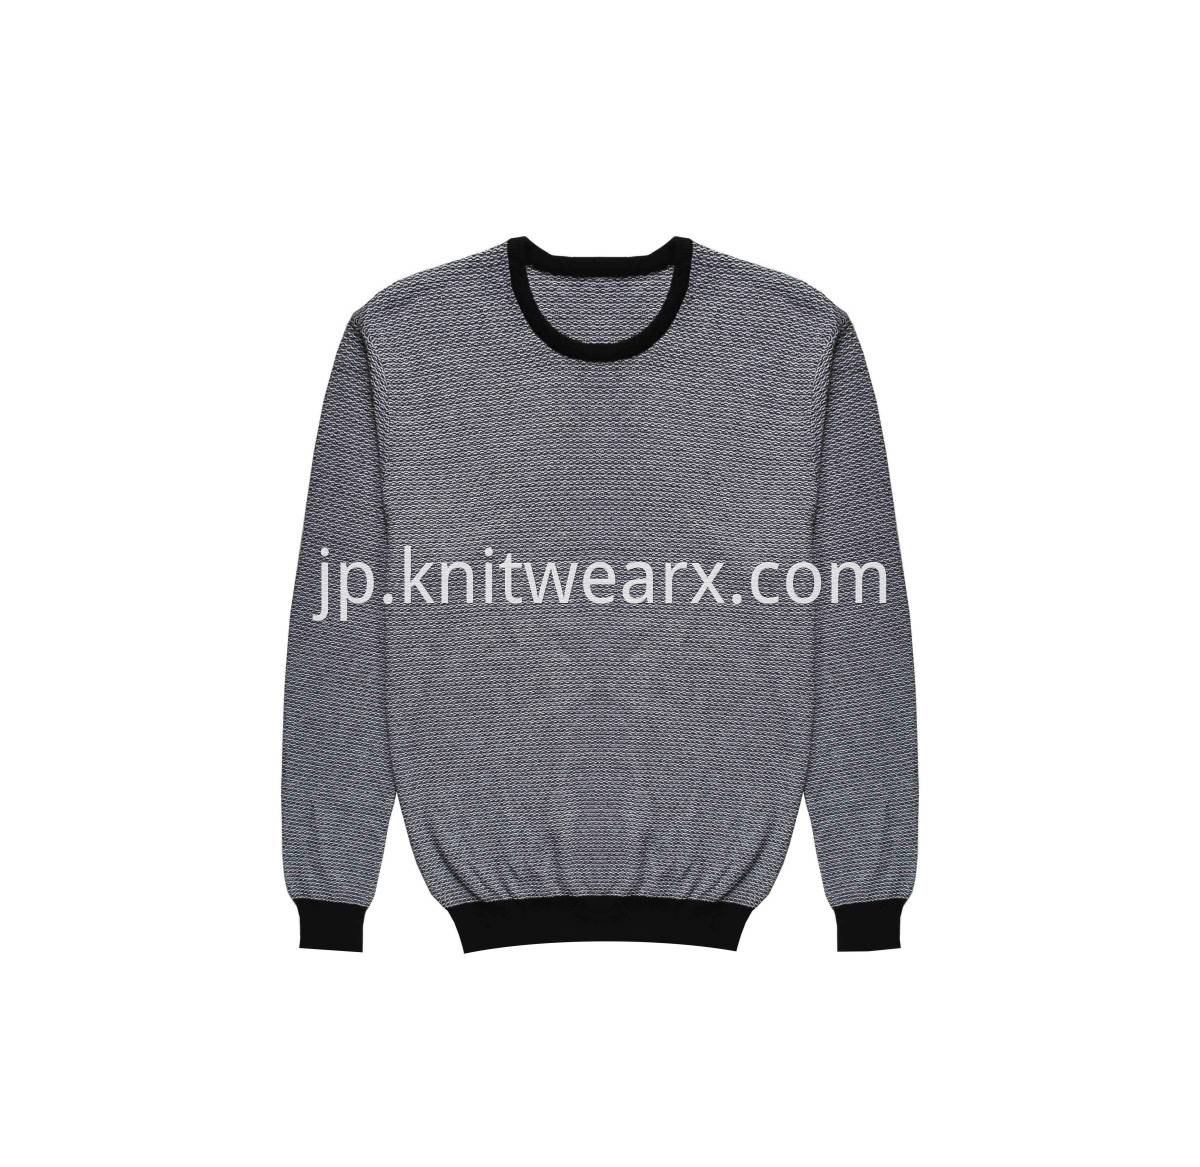 Men's Classic Knitted Purl Stitch Sweater Crewneck Pullover